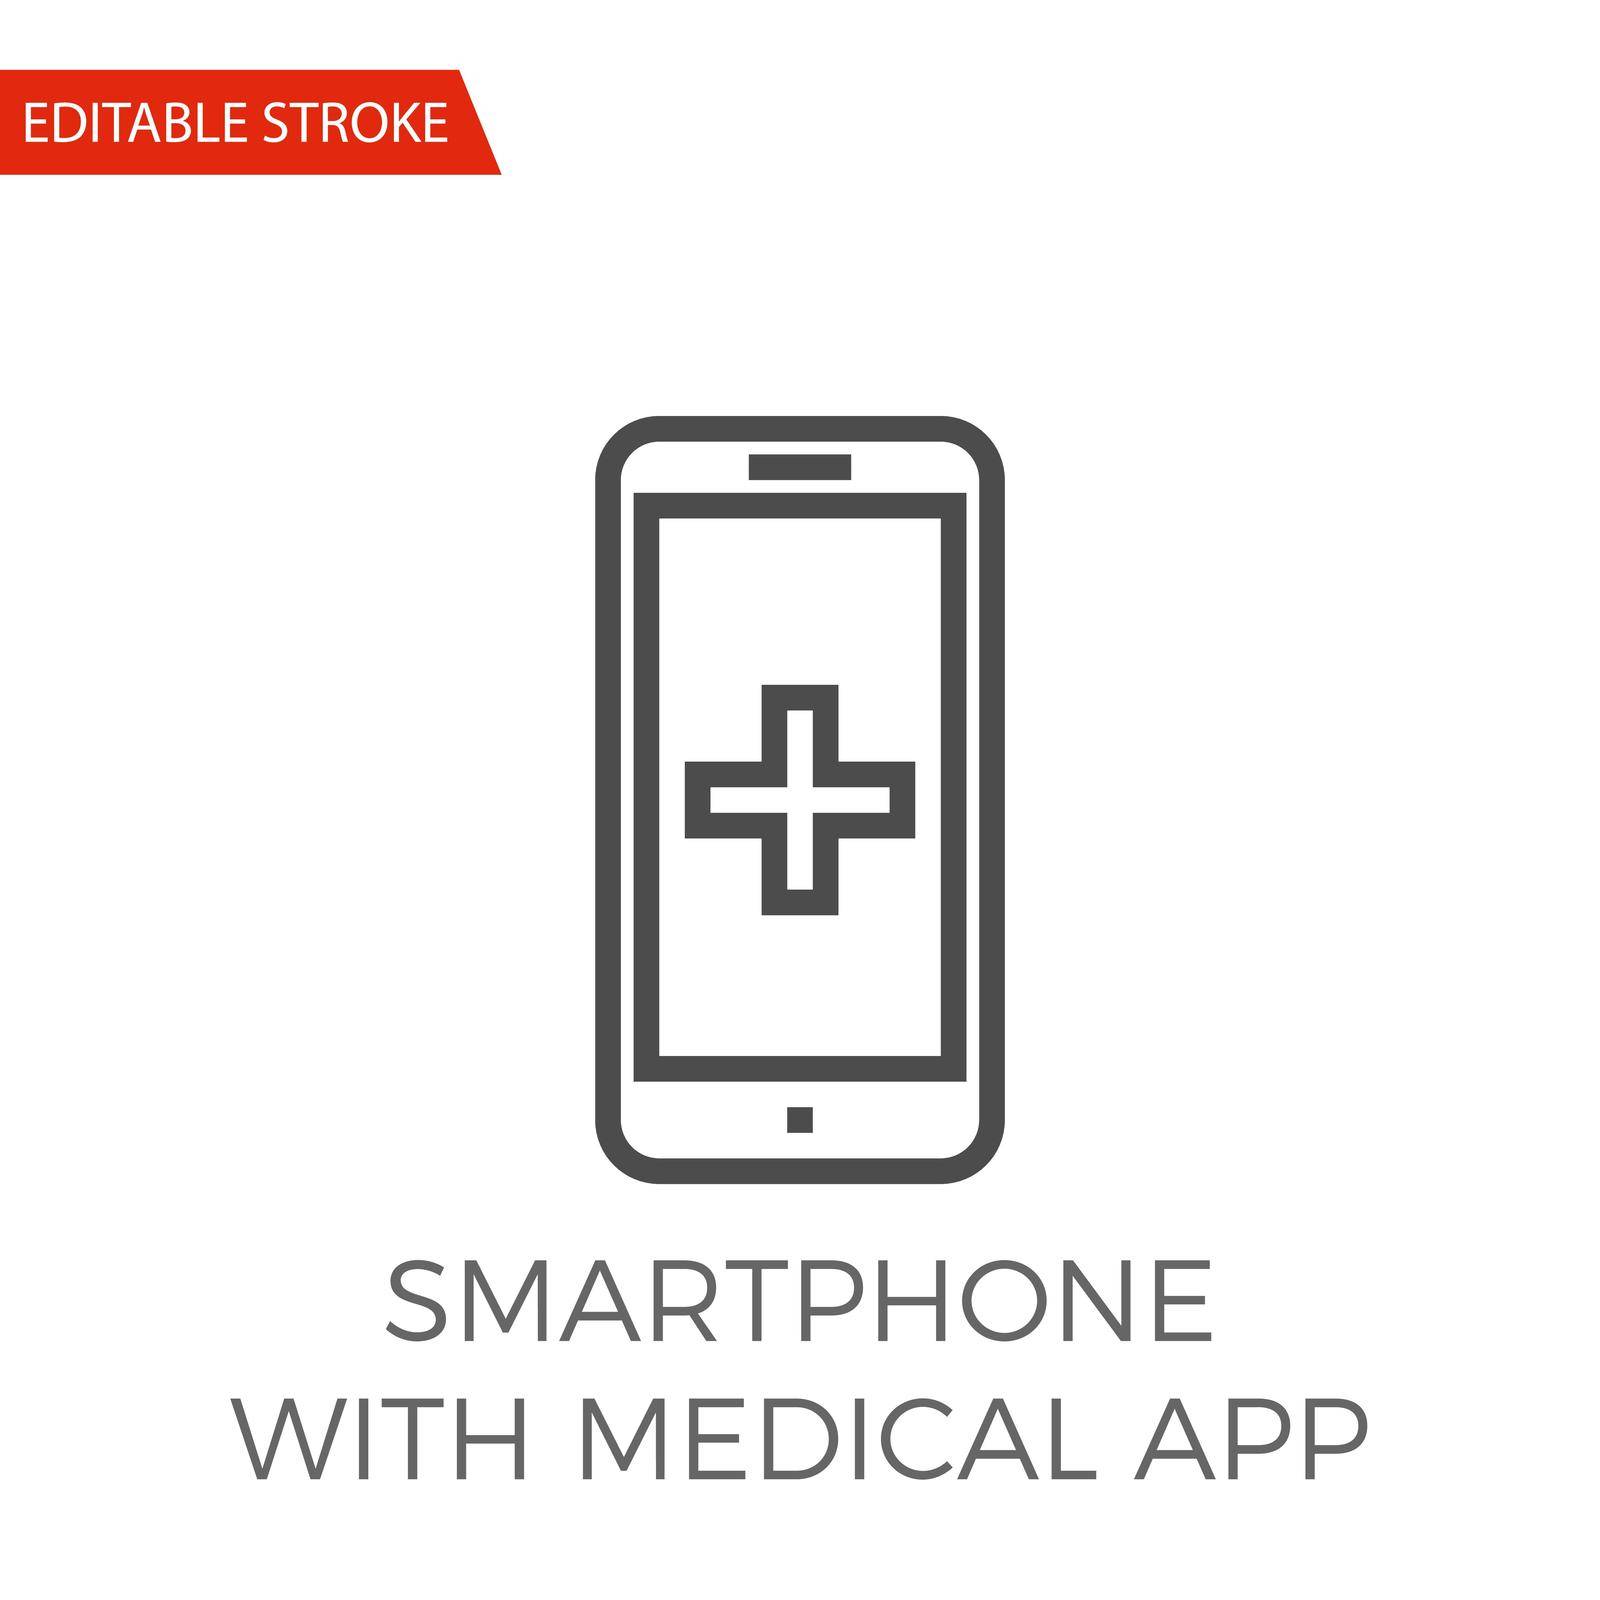 Smartphone with Medical App Vector Icon by smoki